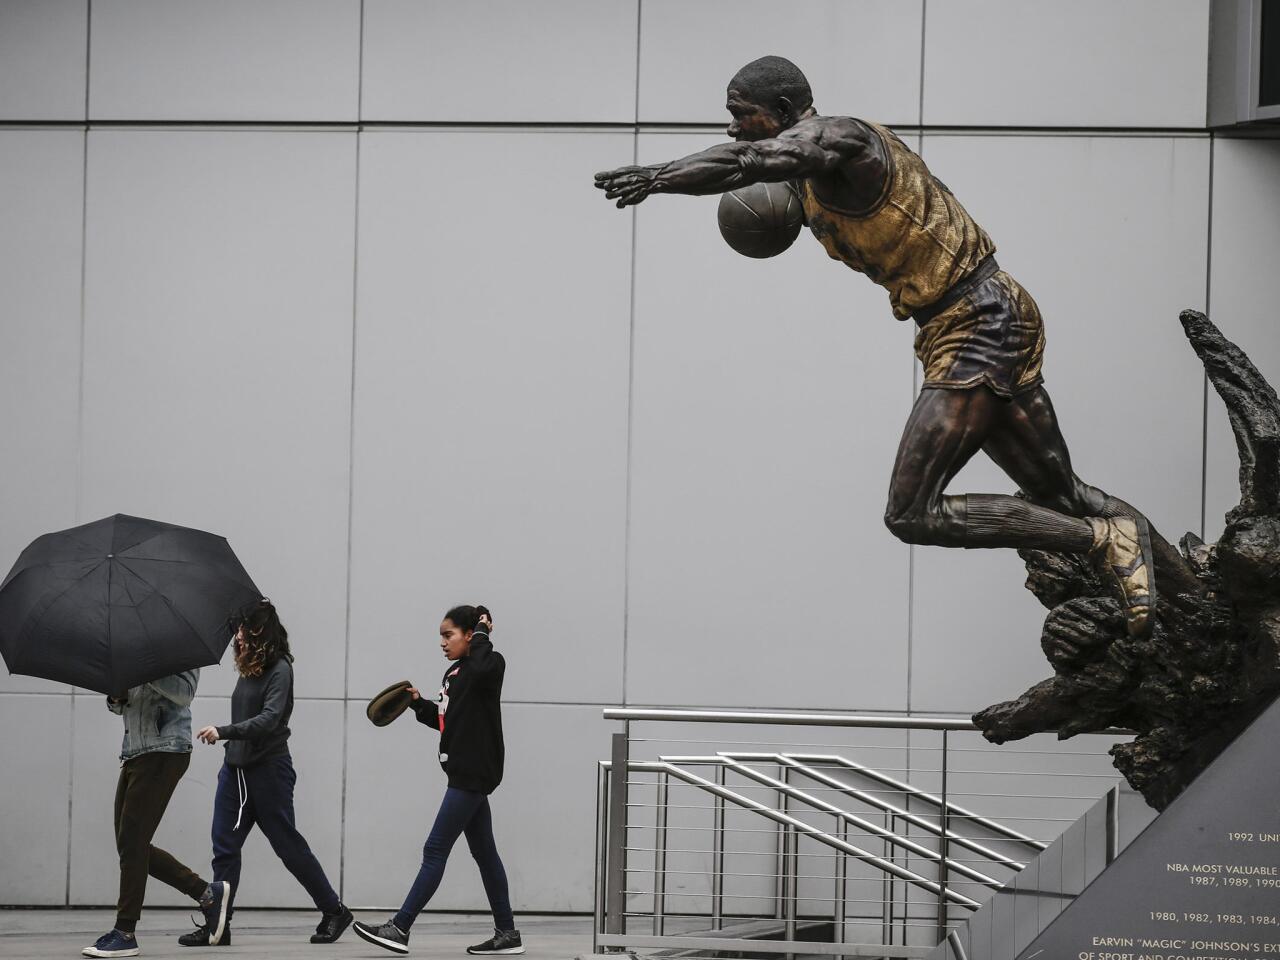 Pedestrians pass a statue of Magic Johnson leaning into a blustery wind outside Staples Center in downtown Los Angeles on Wednesday.